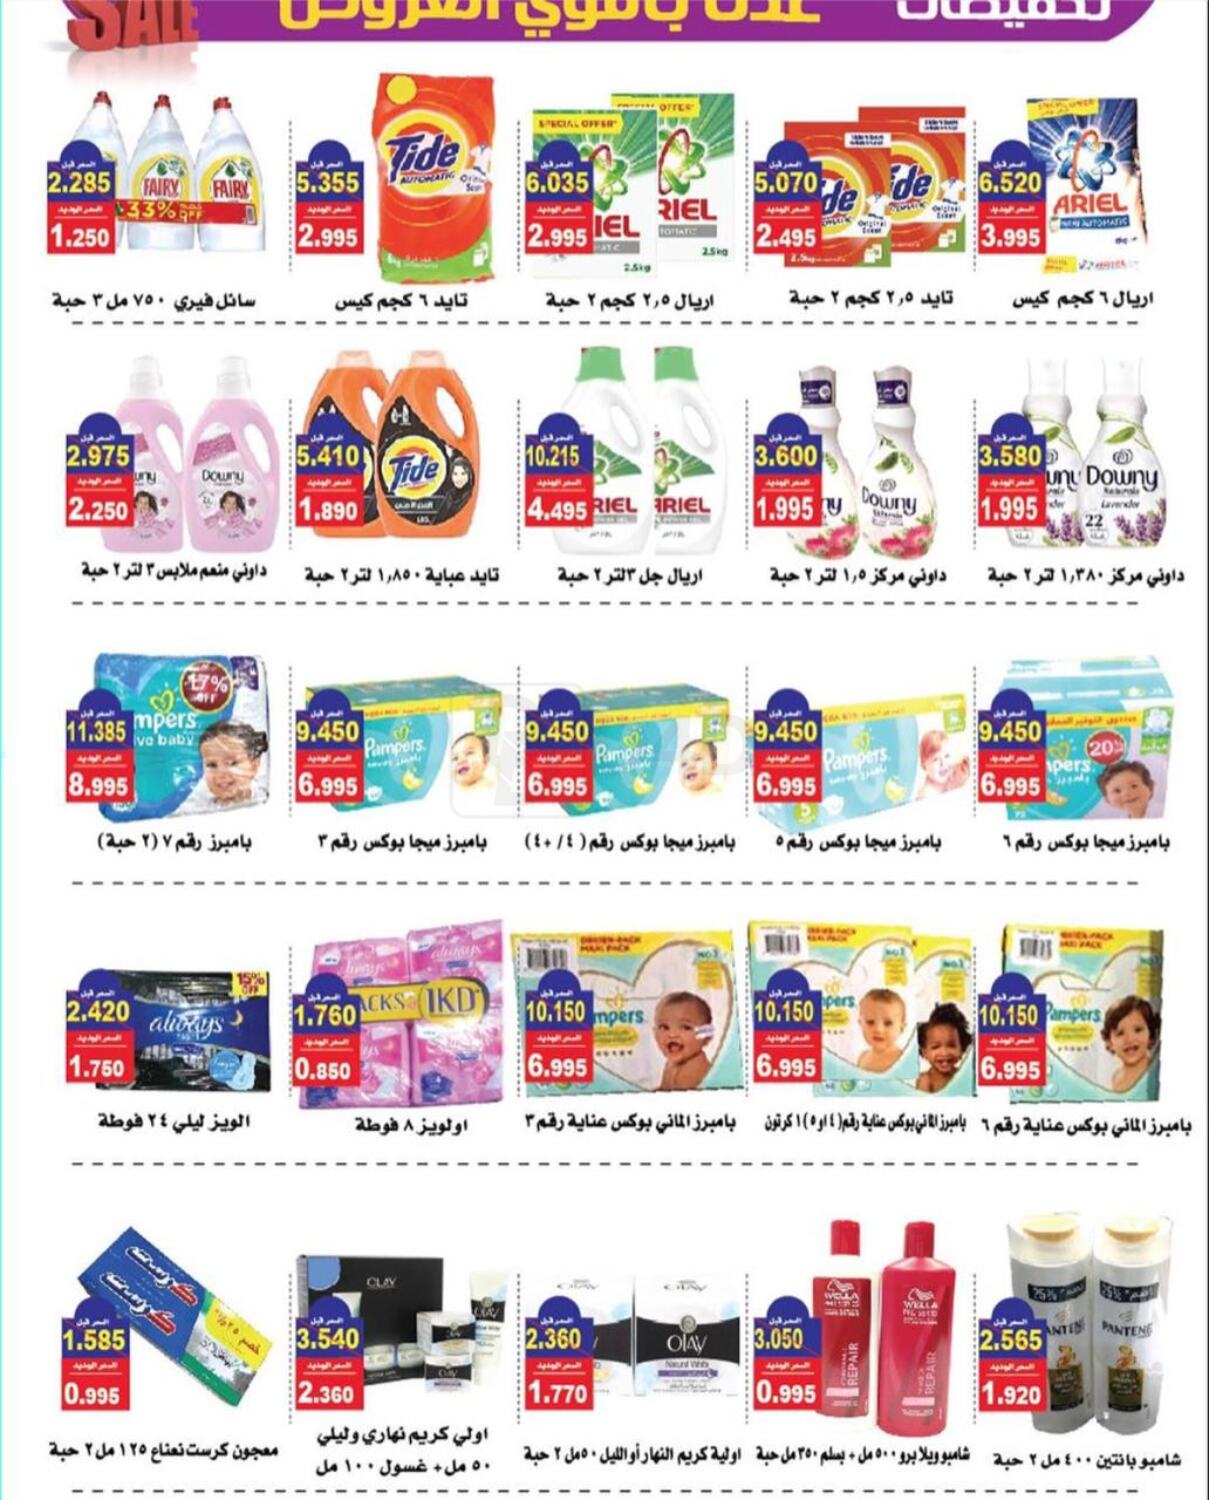 Salwa Co-Operative Society Big Sale in Kuwait. Till 29th September